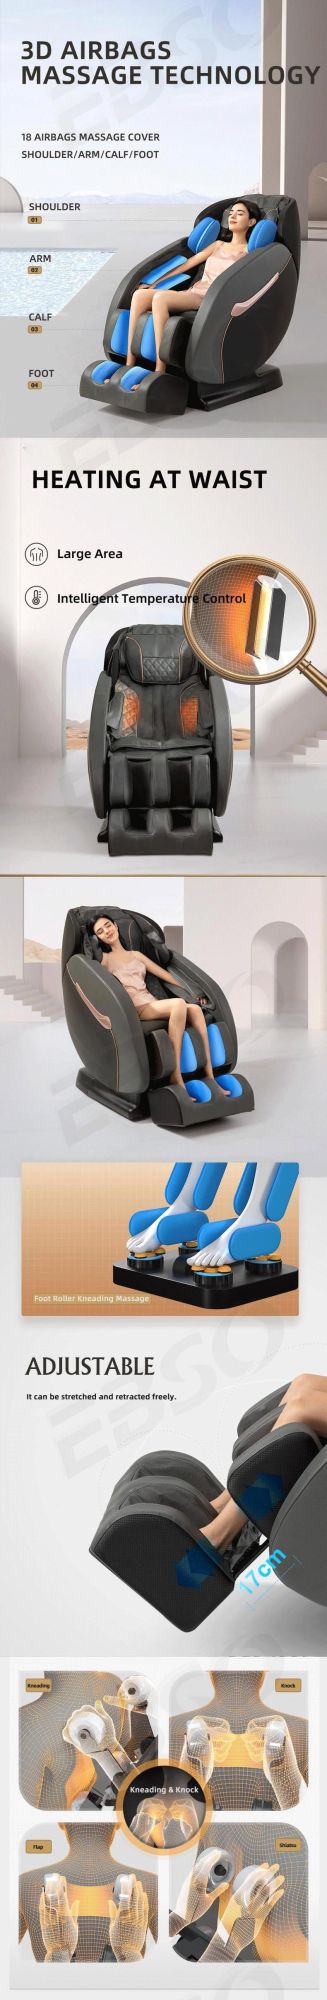 Hc-N005 Multi Function 3D Zero Gravity Space Capsule Massage Chair with Competitive Price